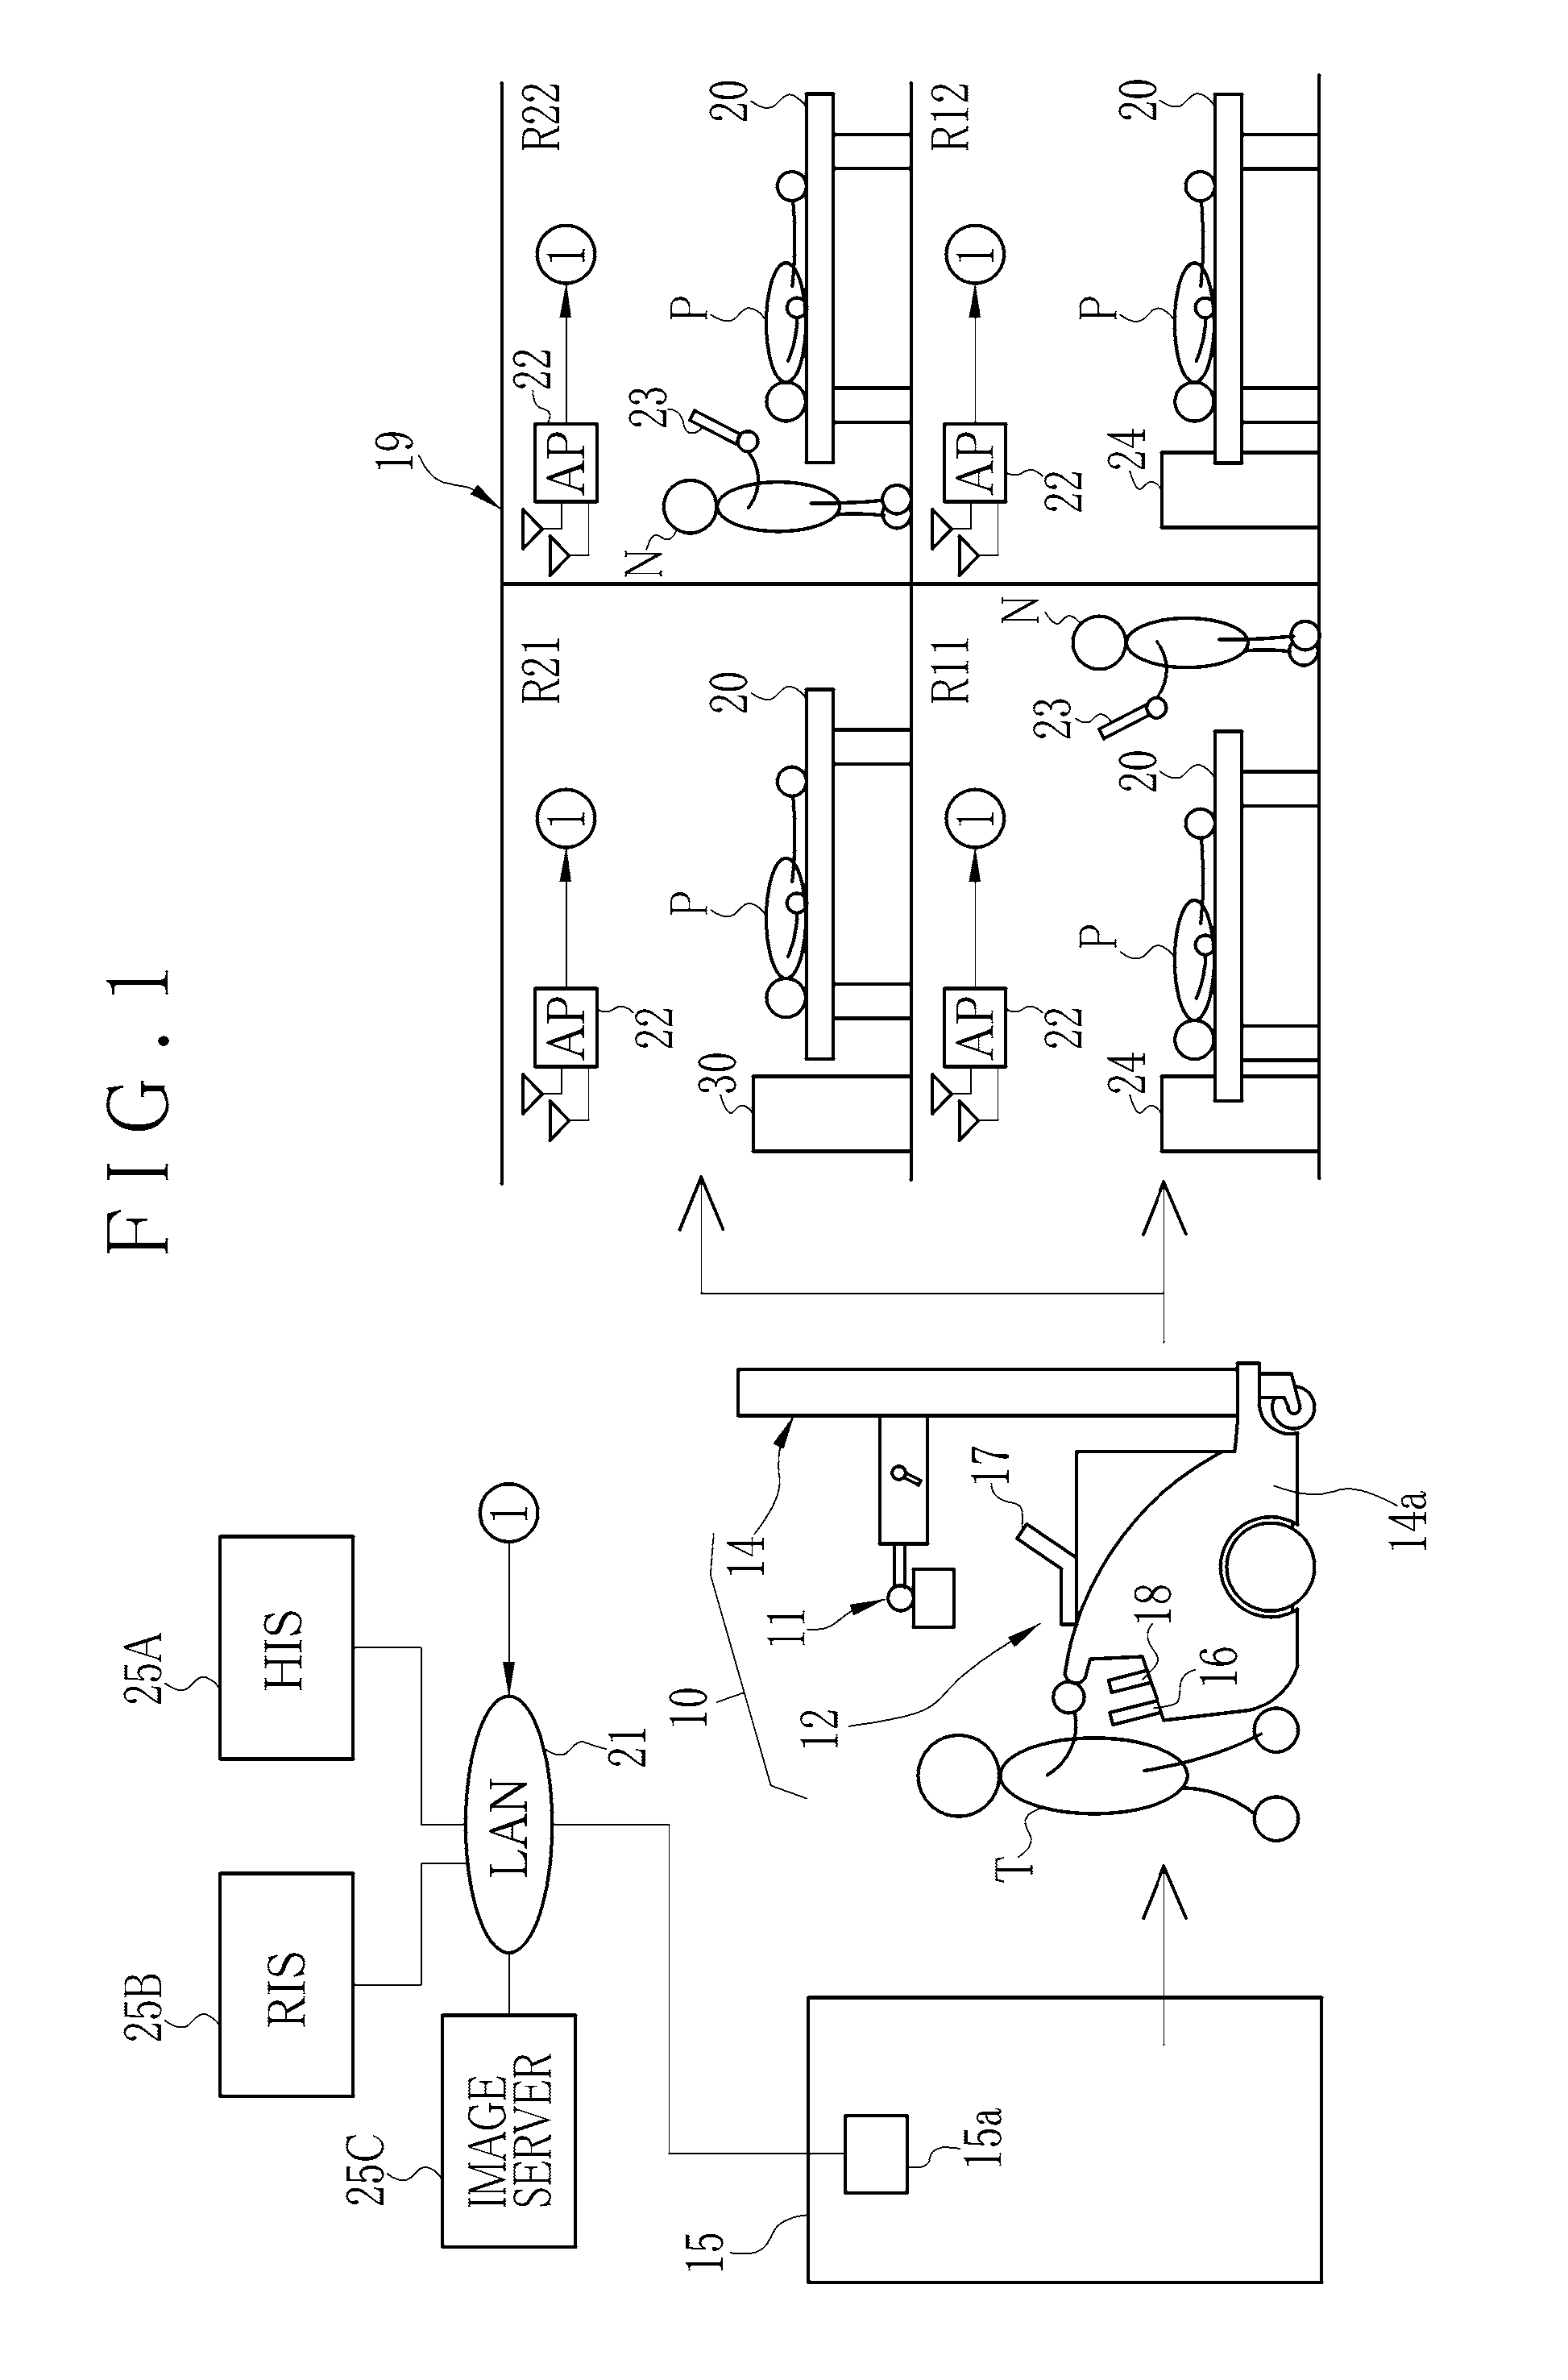 Portable radiographic imaging apparatus and system